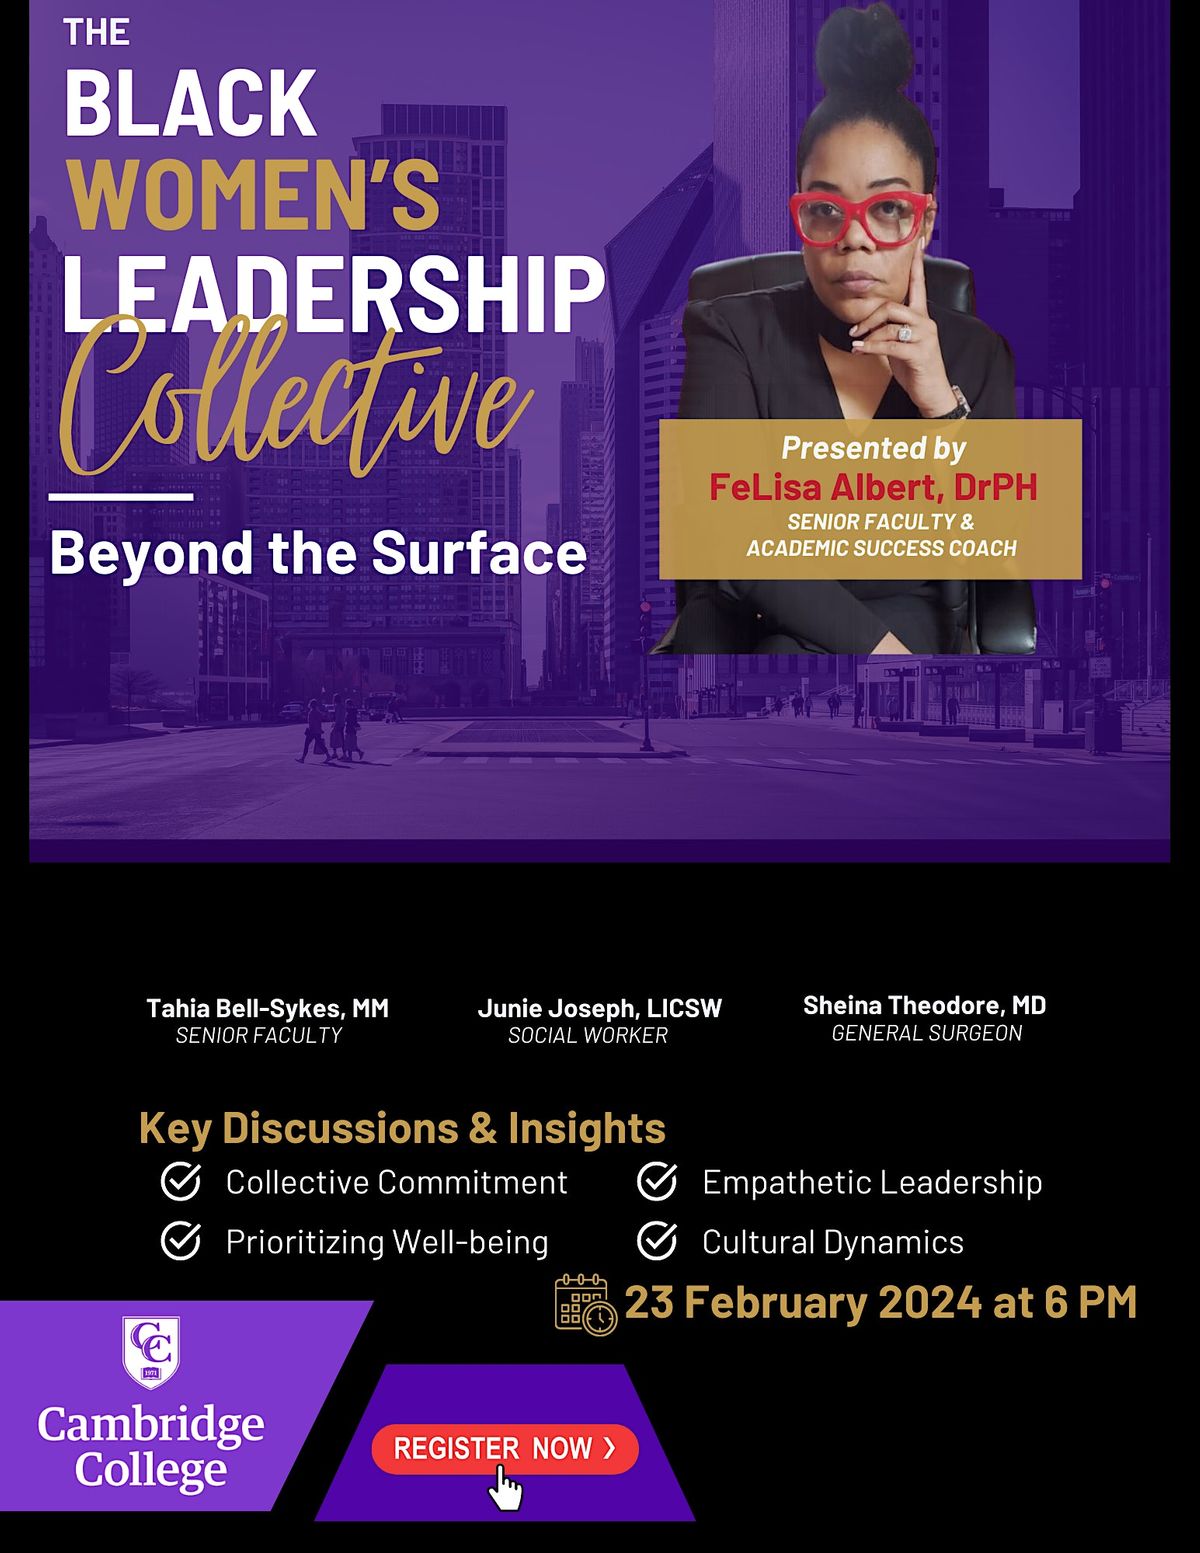 The Black Women's Leadership Collective: Beyond the Surface